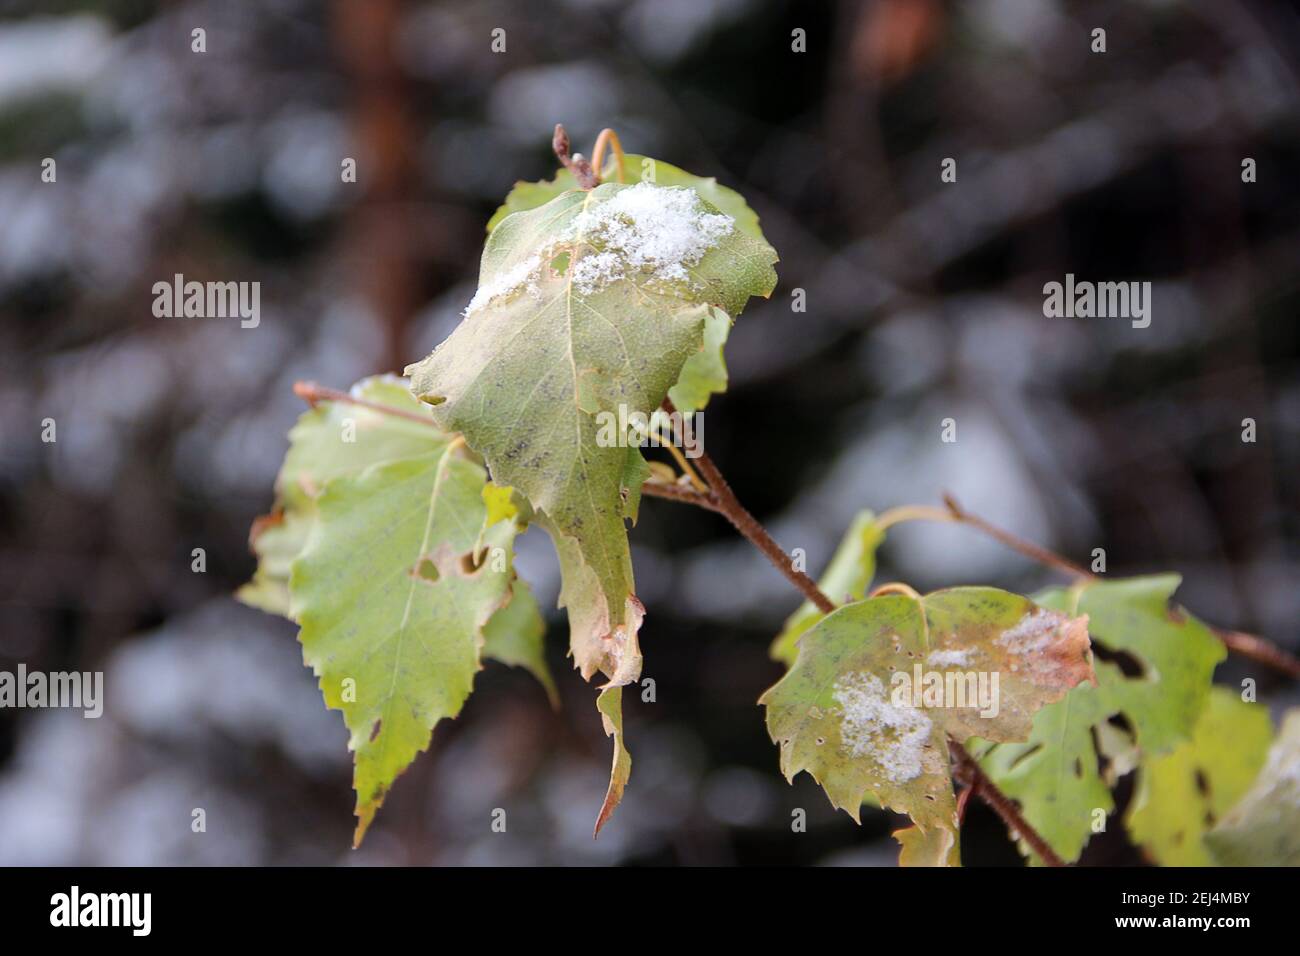 Macro image of some autumn dry leaves covered with snow crystals. Stock Photo